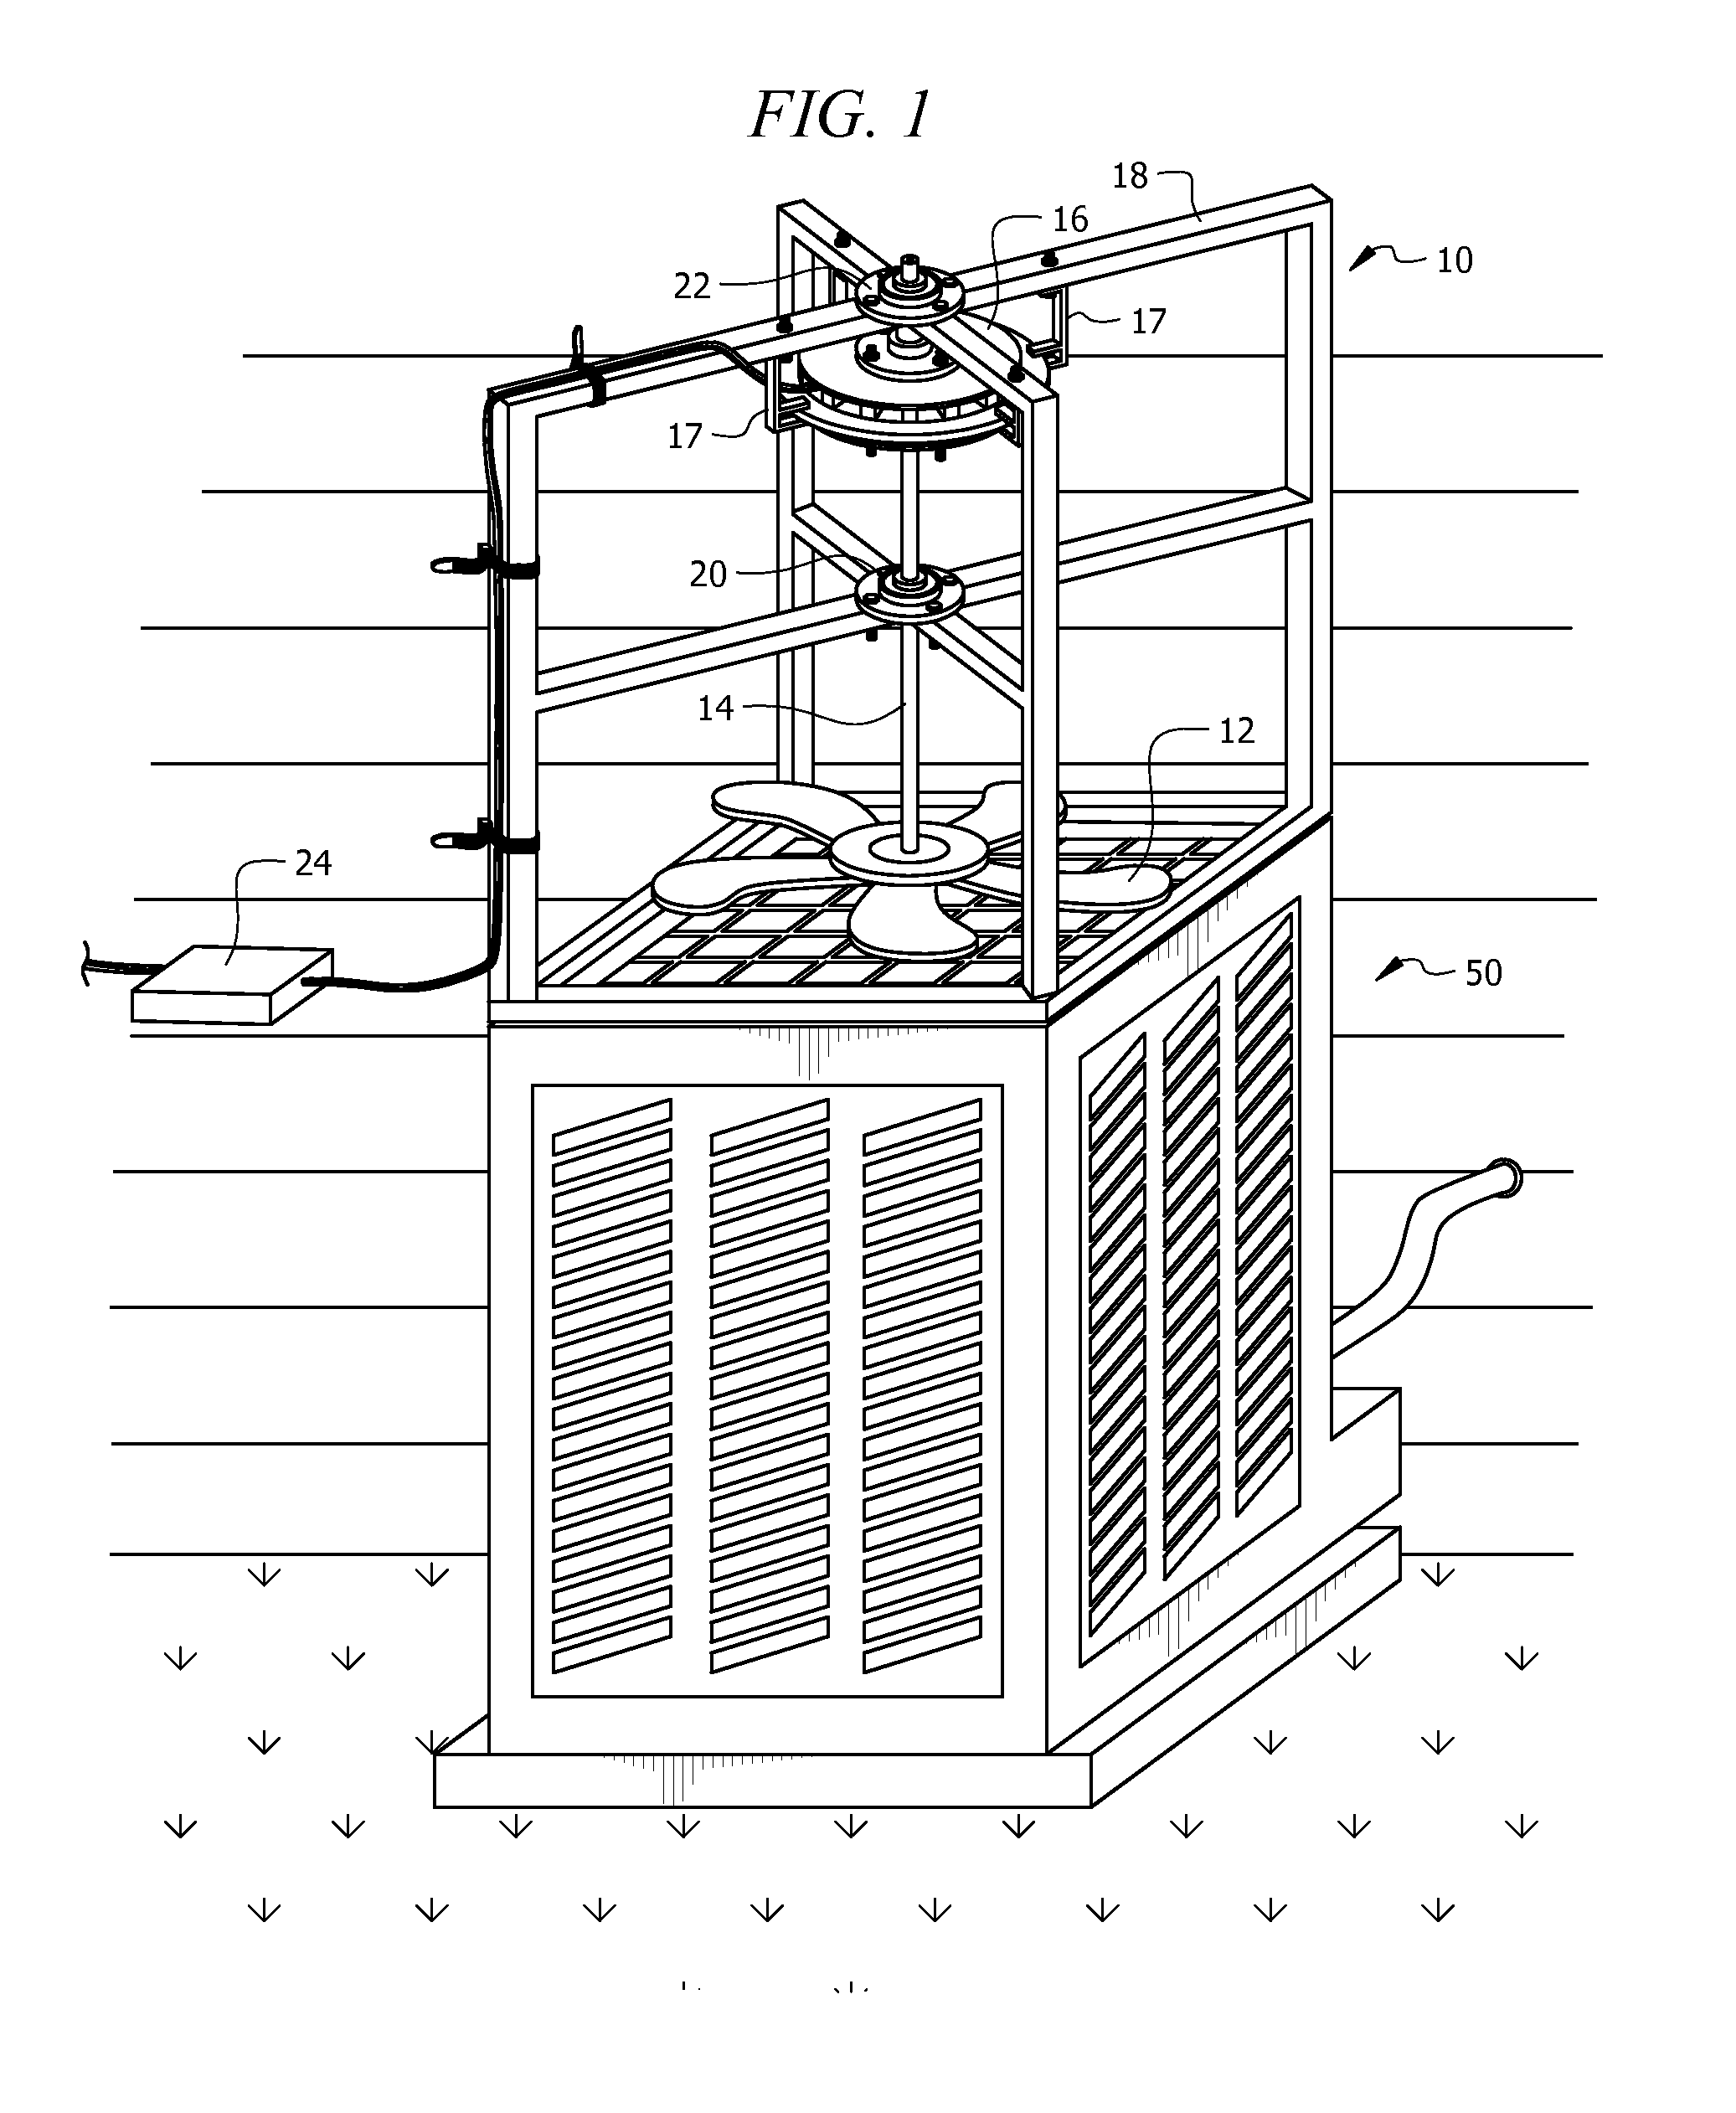 System and apparatus for the generation of electical power